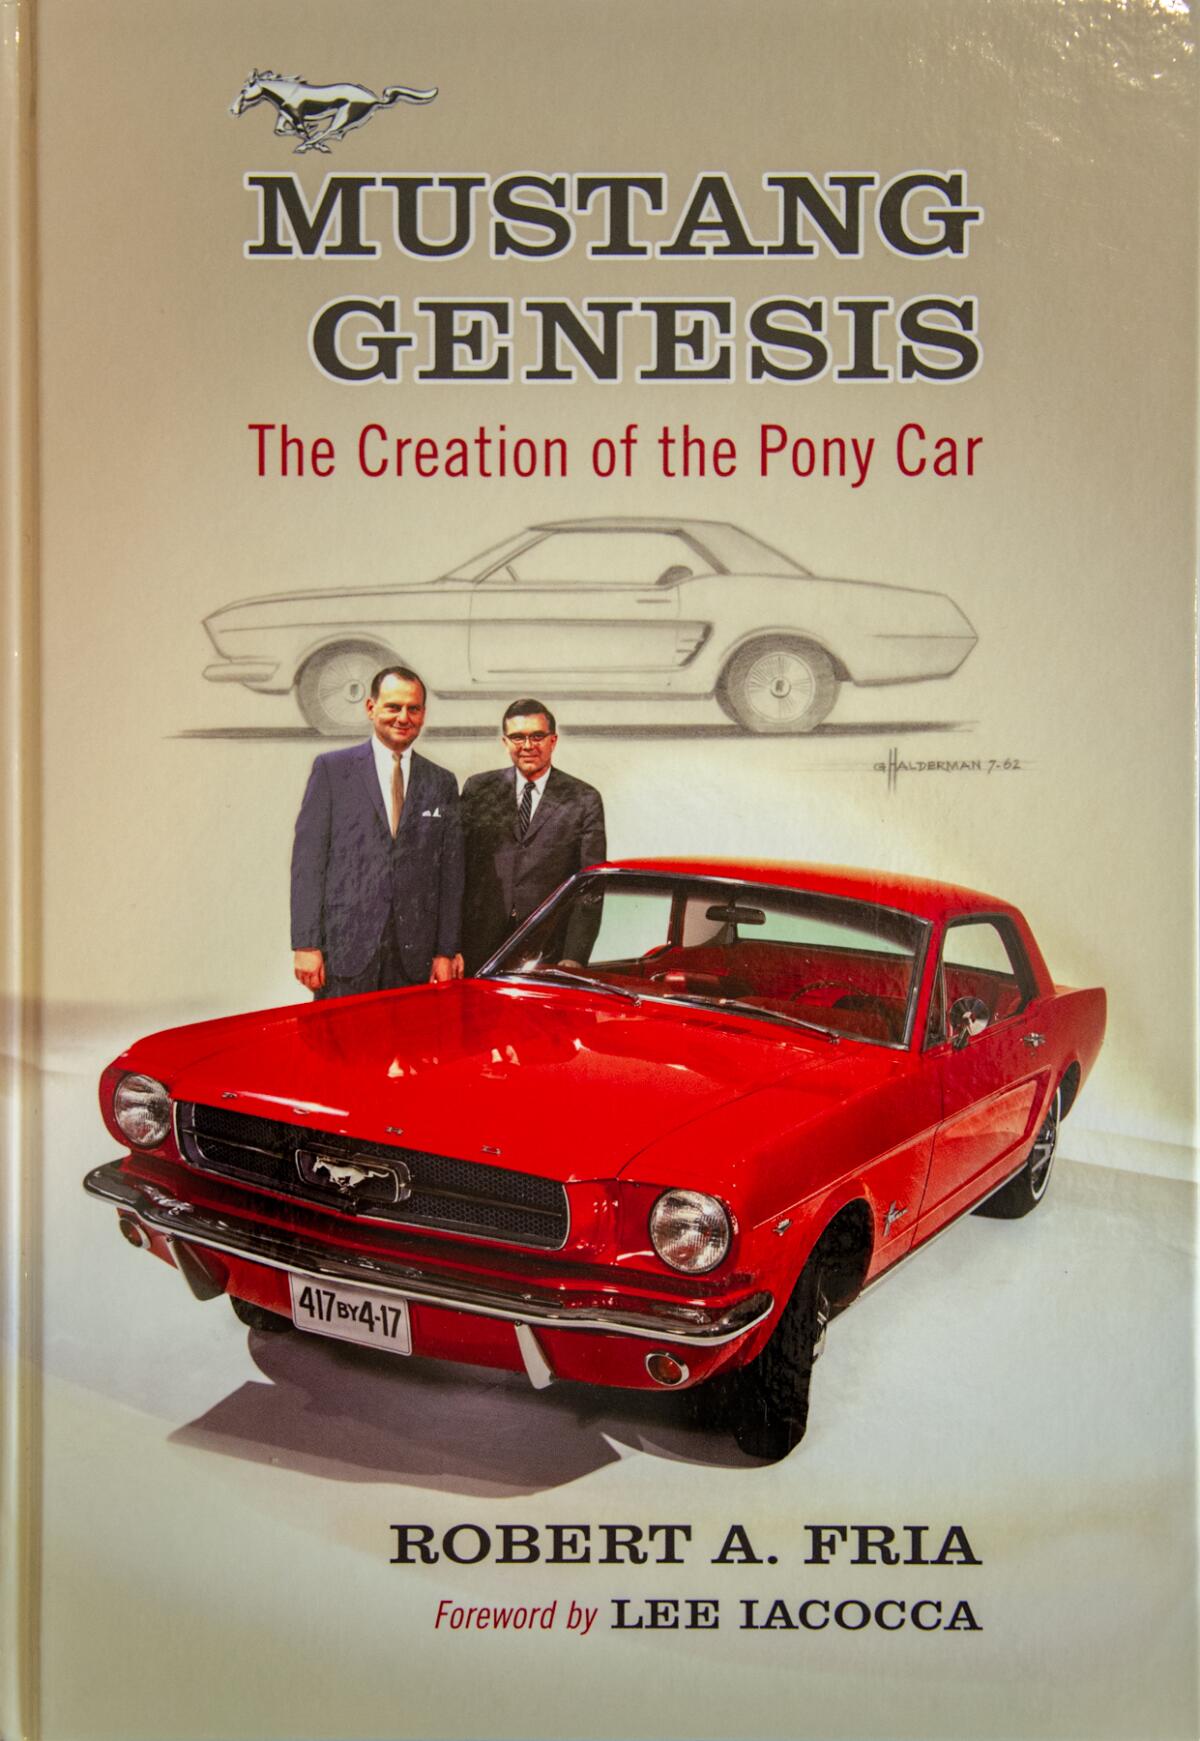 00961-20130305 Mustang Genesis book by Robert Fria-& Mustang model-for AutoMatters 270